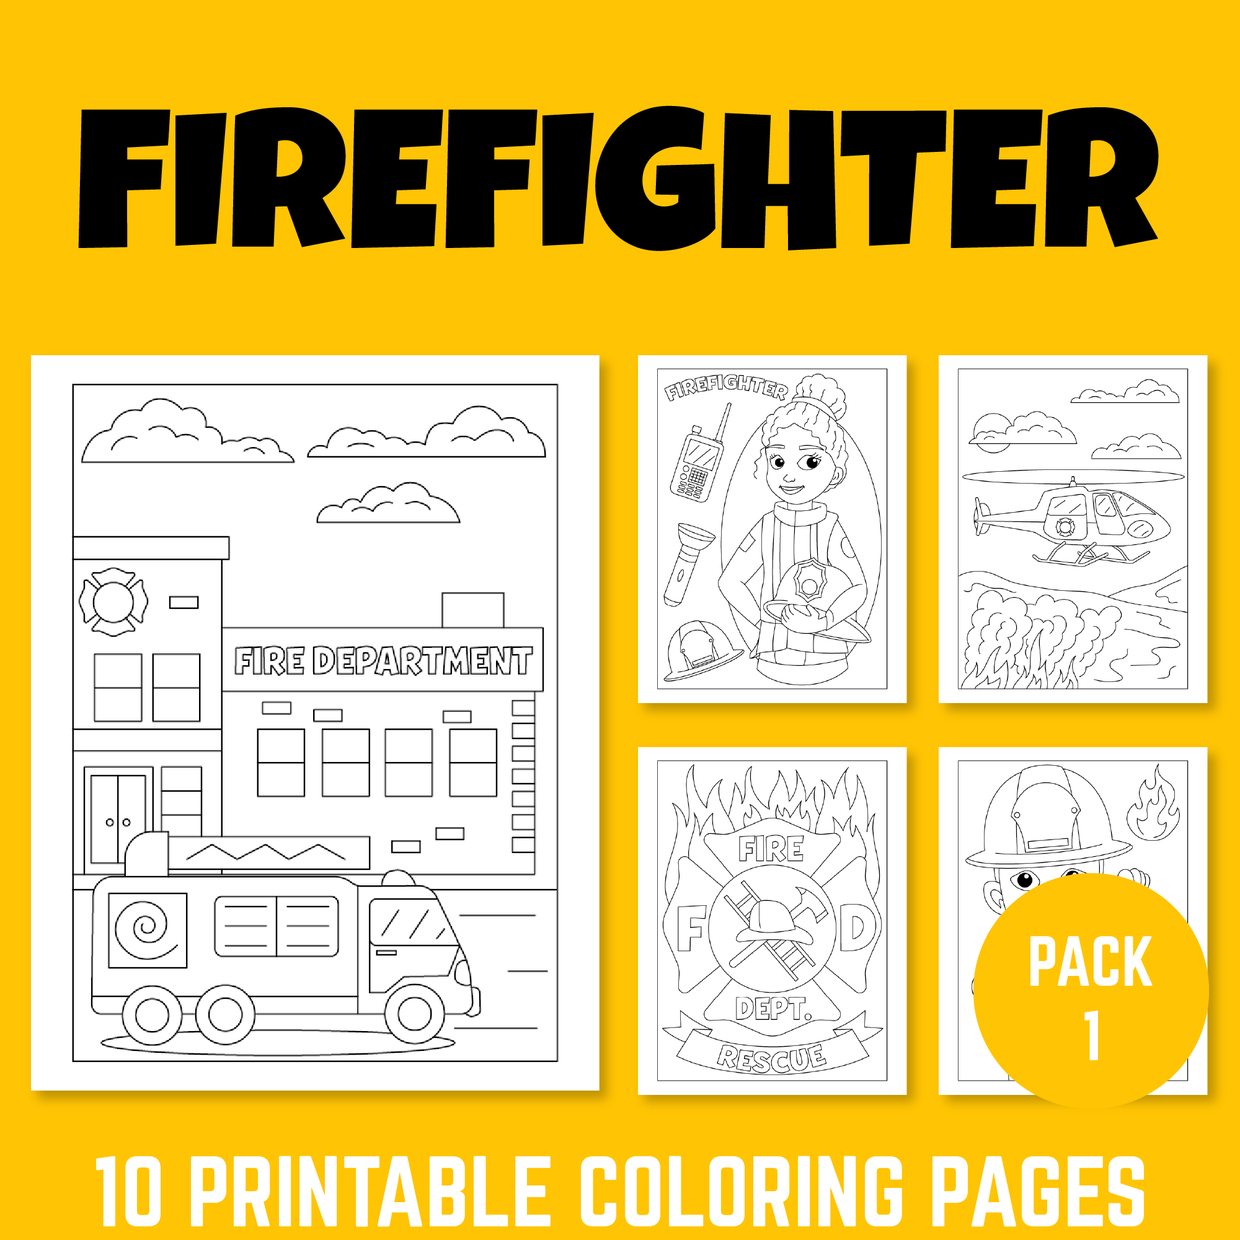 Firefighter coloring sheet pack for career explorati